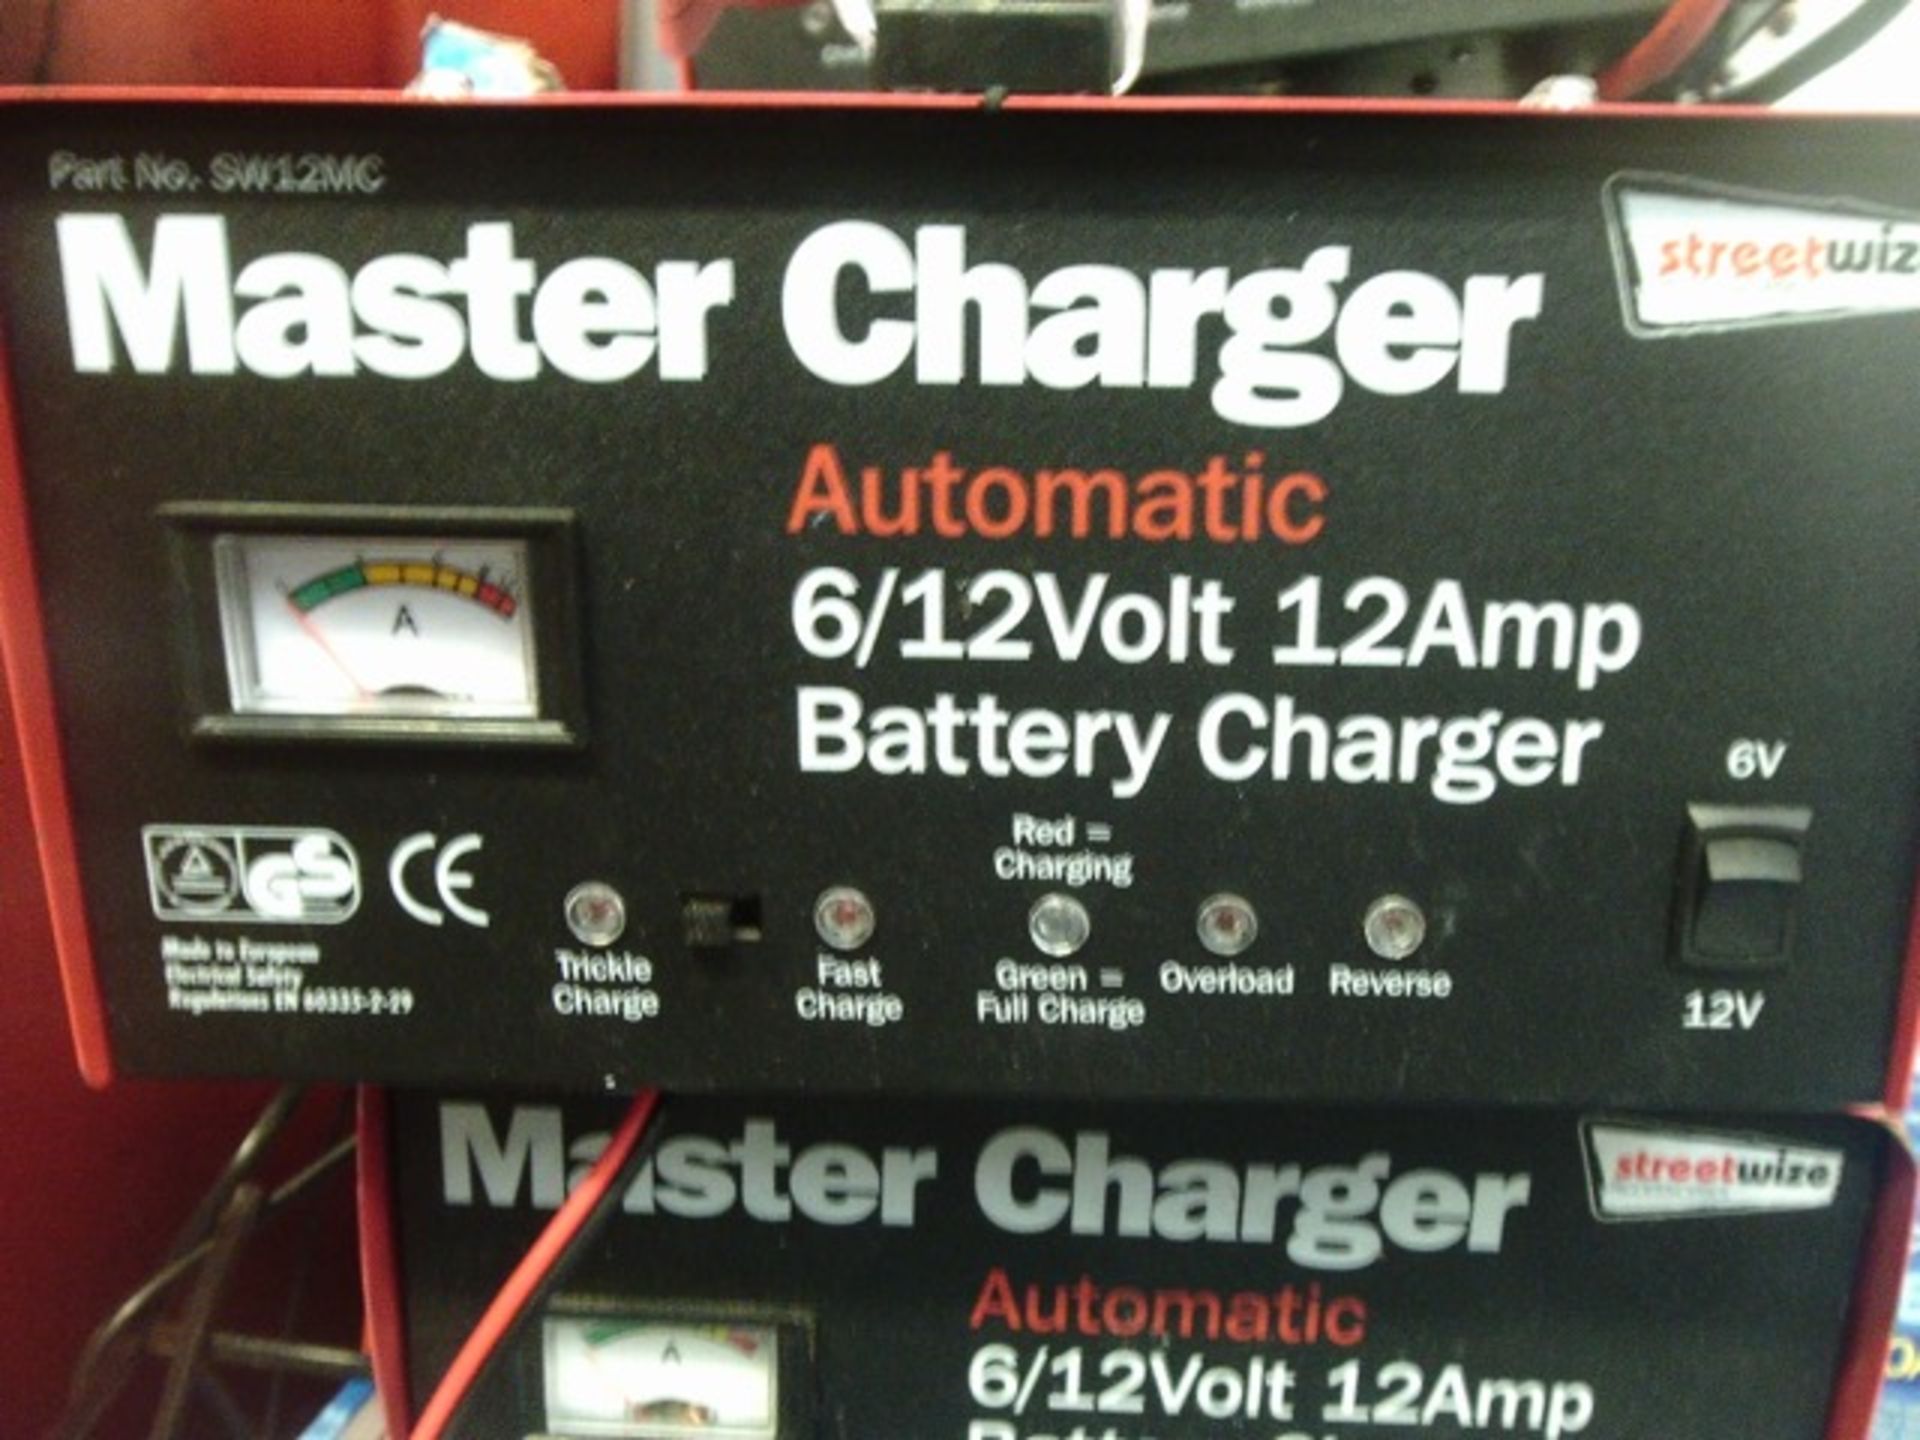 unboxed Streetwise 6/12Volt -12amp Auctomatic battery charger -